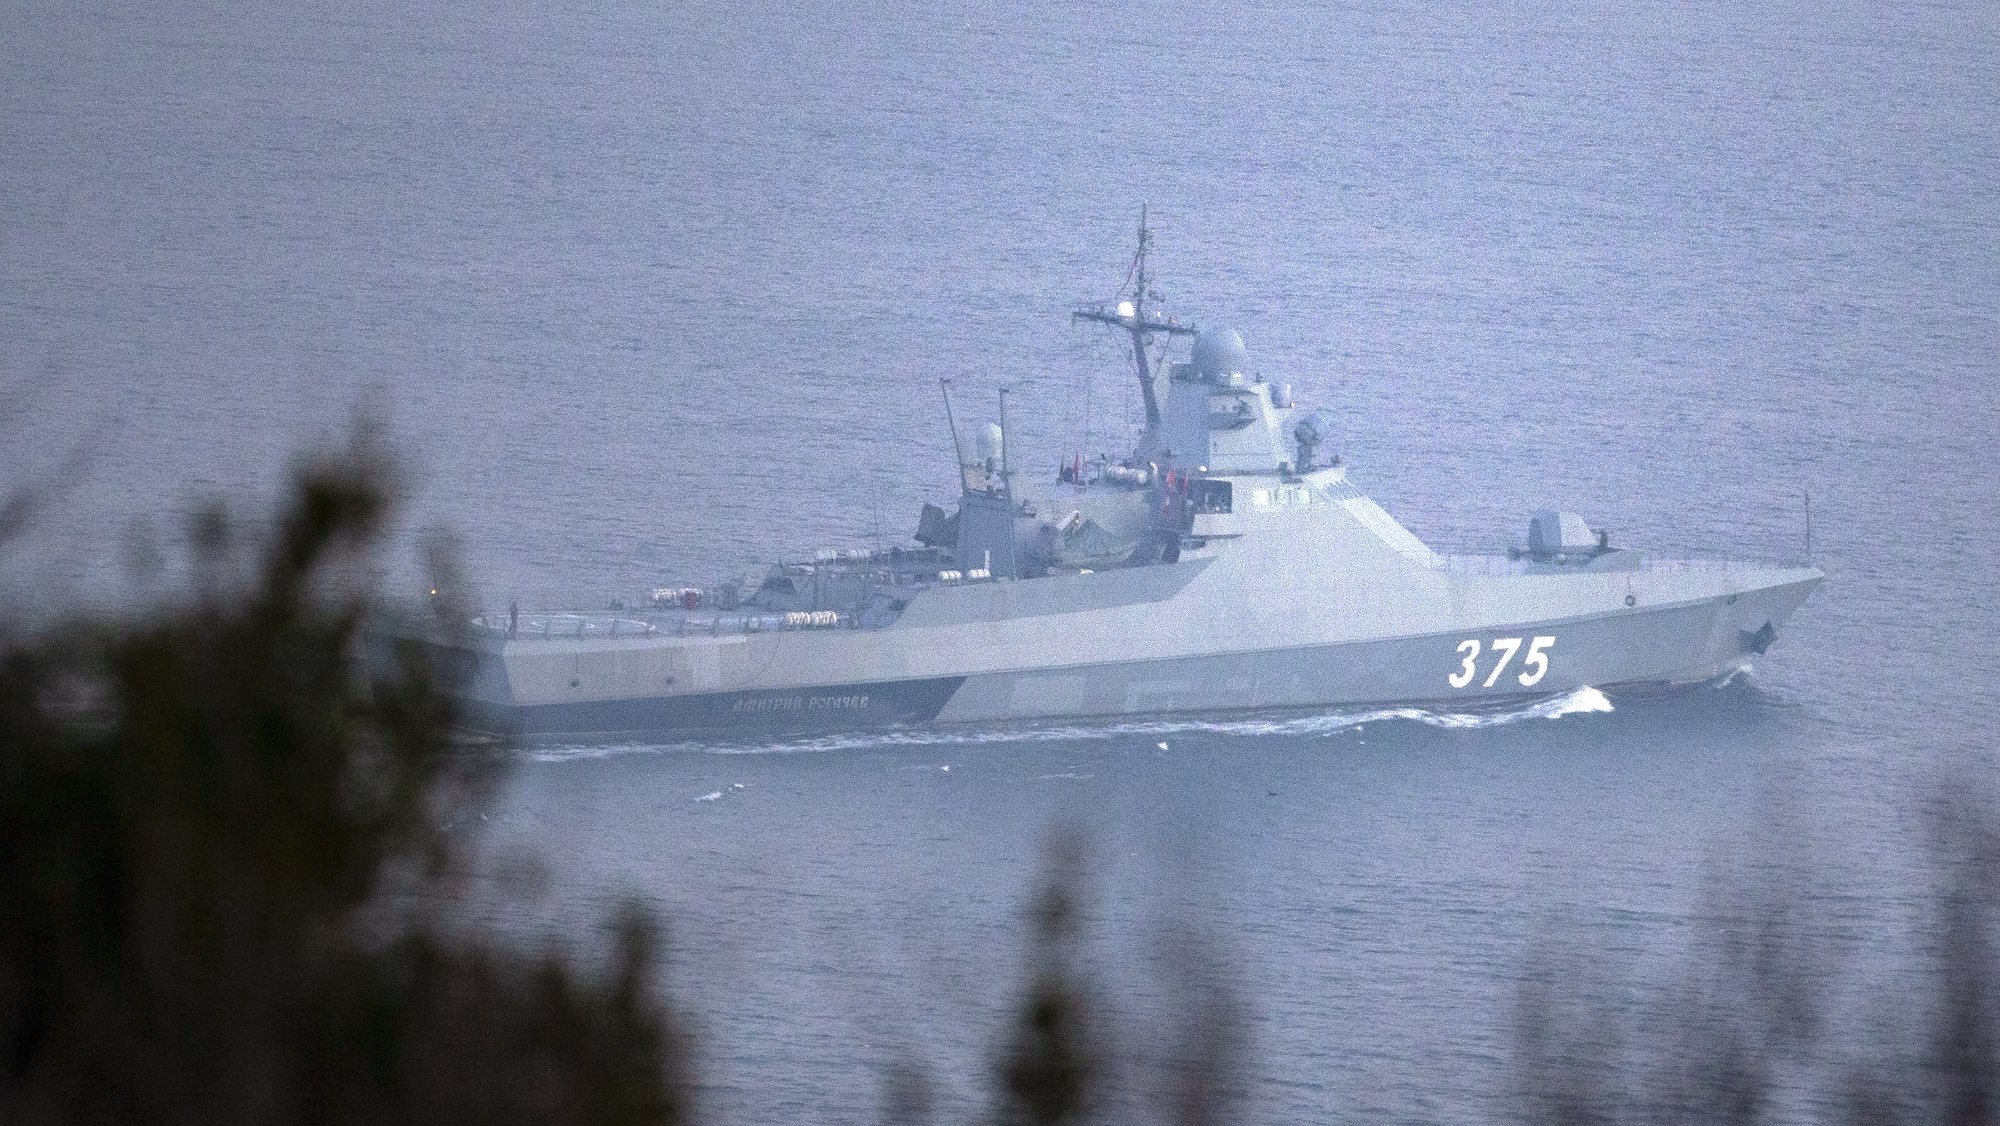 epa09760974 Russian Navy vessel Dmitry Rogachev 375 sails in the Bosphorus, heading for the Black Sea, in Istanbul, Turkey, 16 February 2022. Russian Navy ships transit the Black Sea for massive drills amid the tensions between Russia and Ukraine.  EPA/ERDEM SAHIN